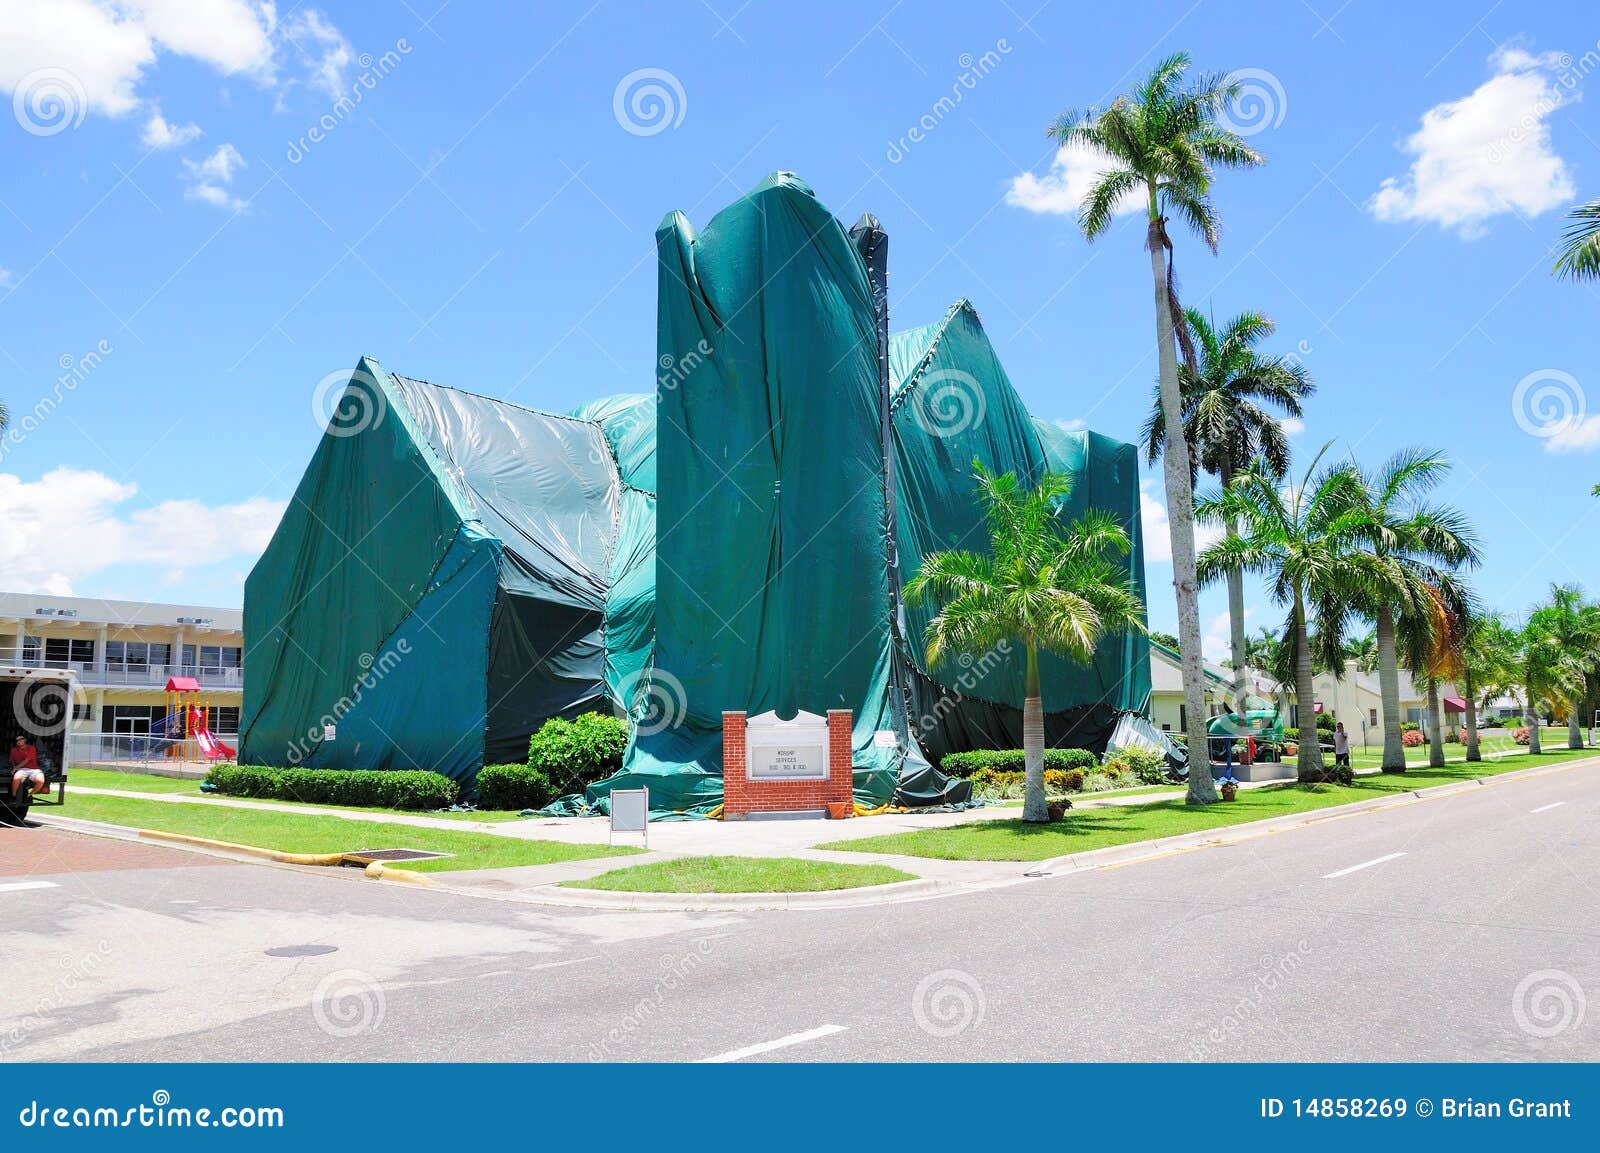 church tented for fumigation